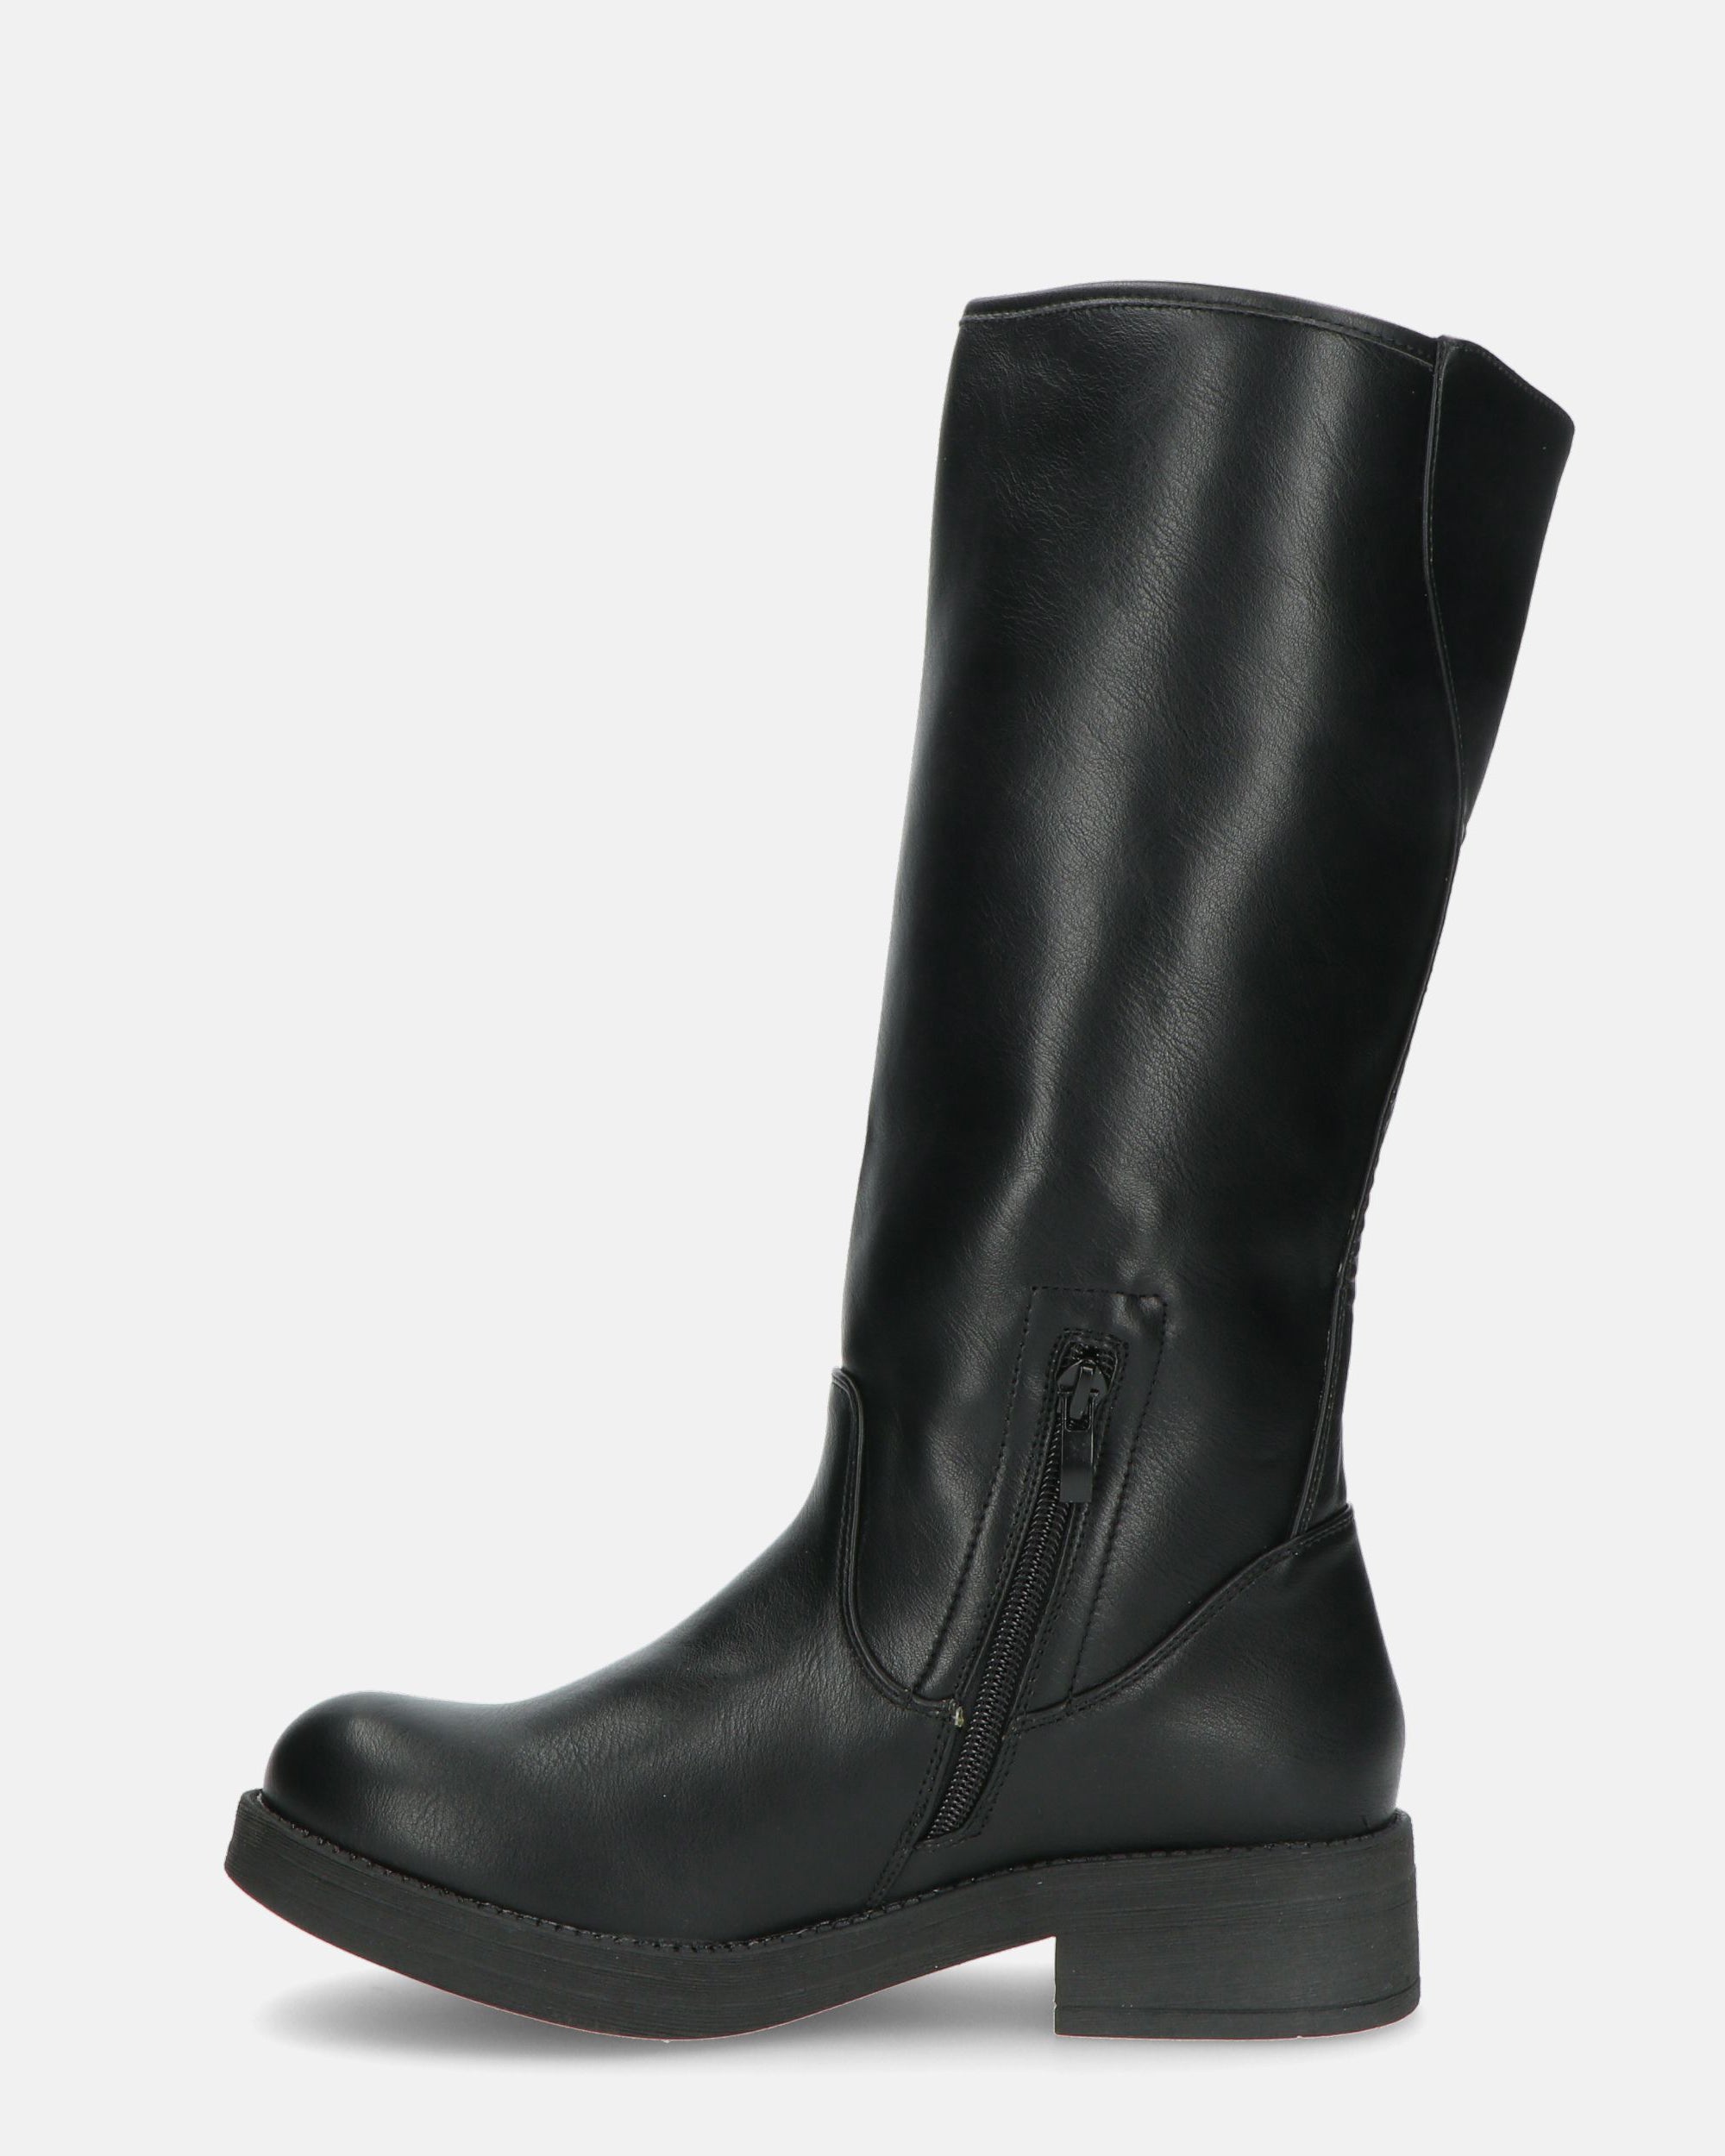 FEDRA - low boots with strap and zipper